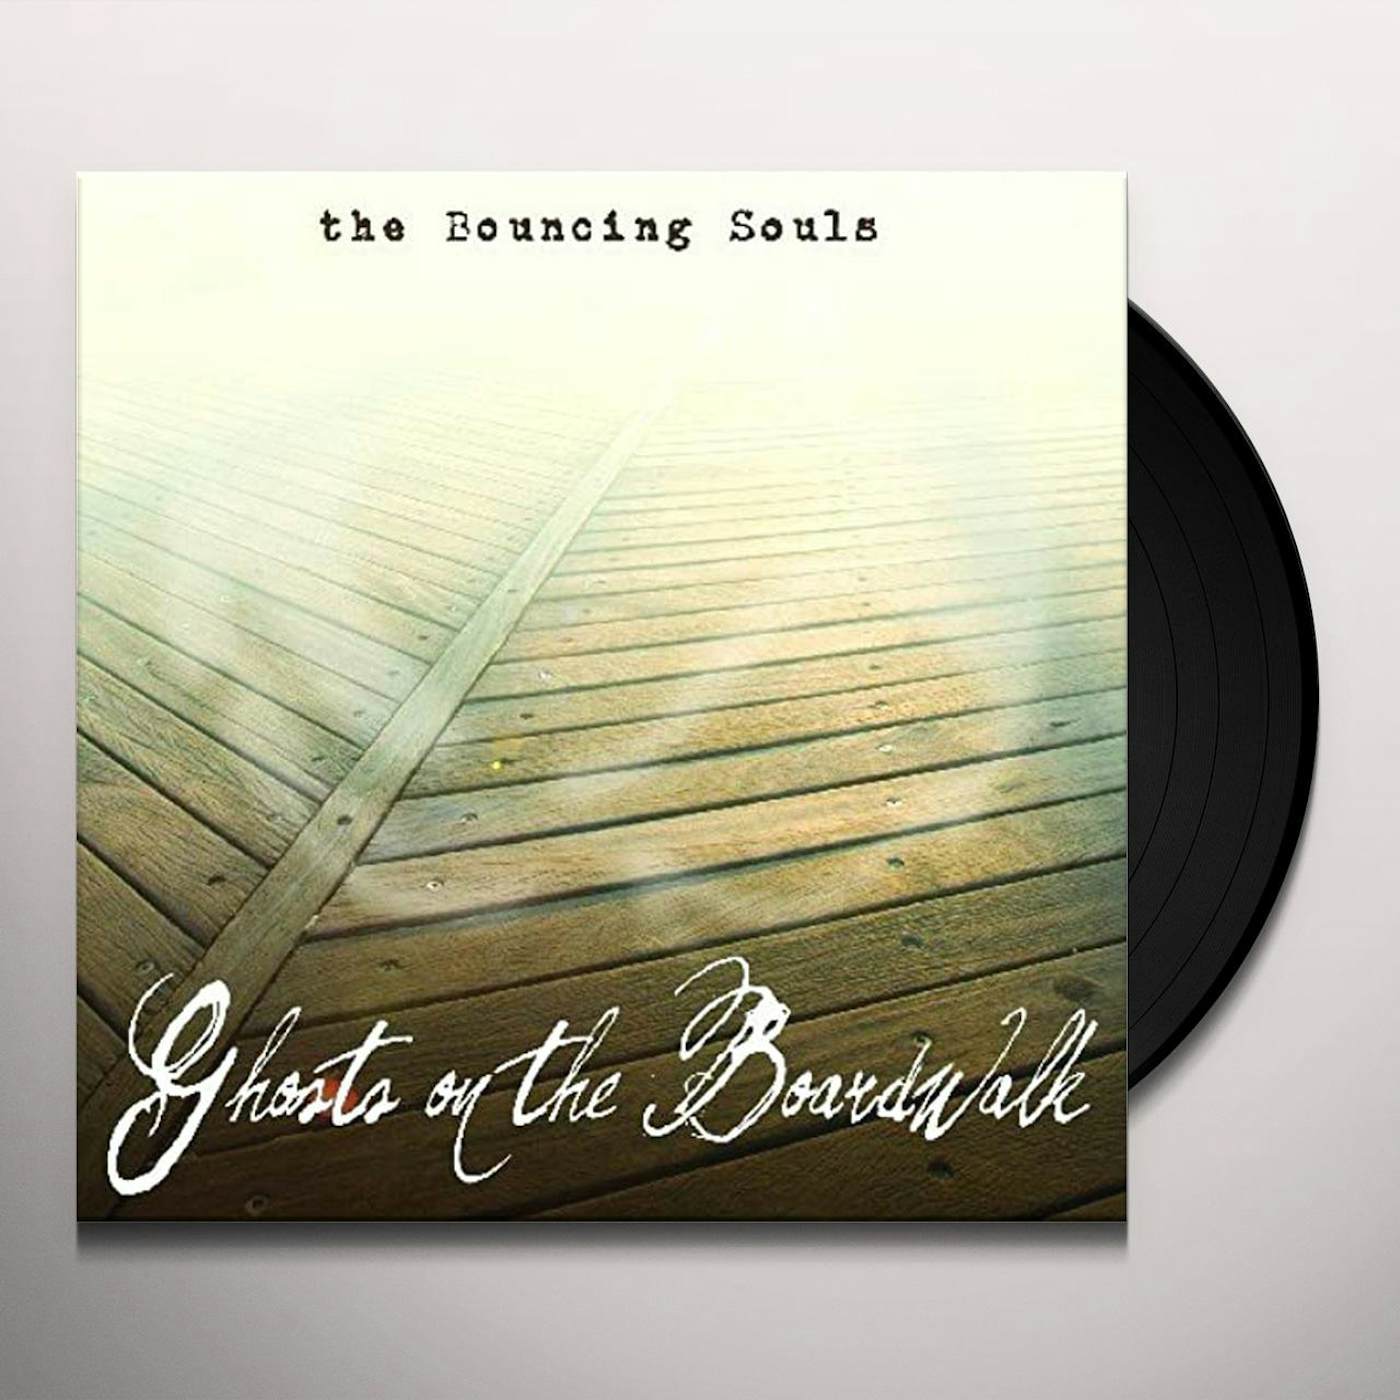 The Bouncing Souls Ghosts On the Boardwalk Vinyl Record